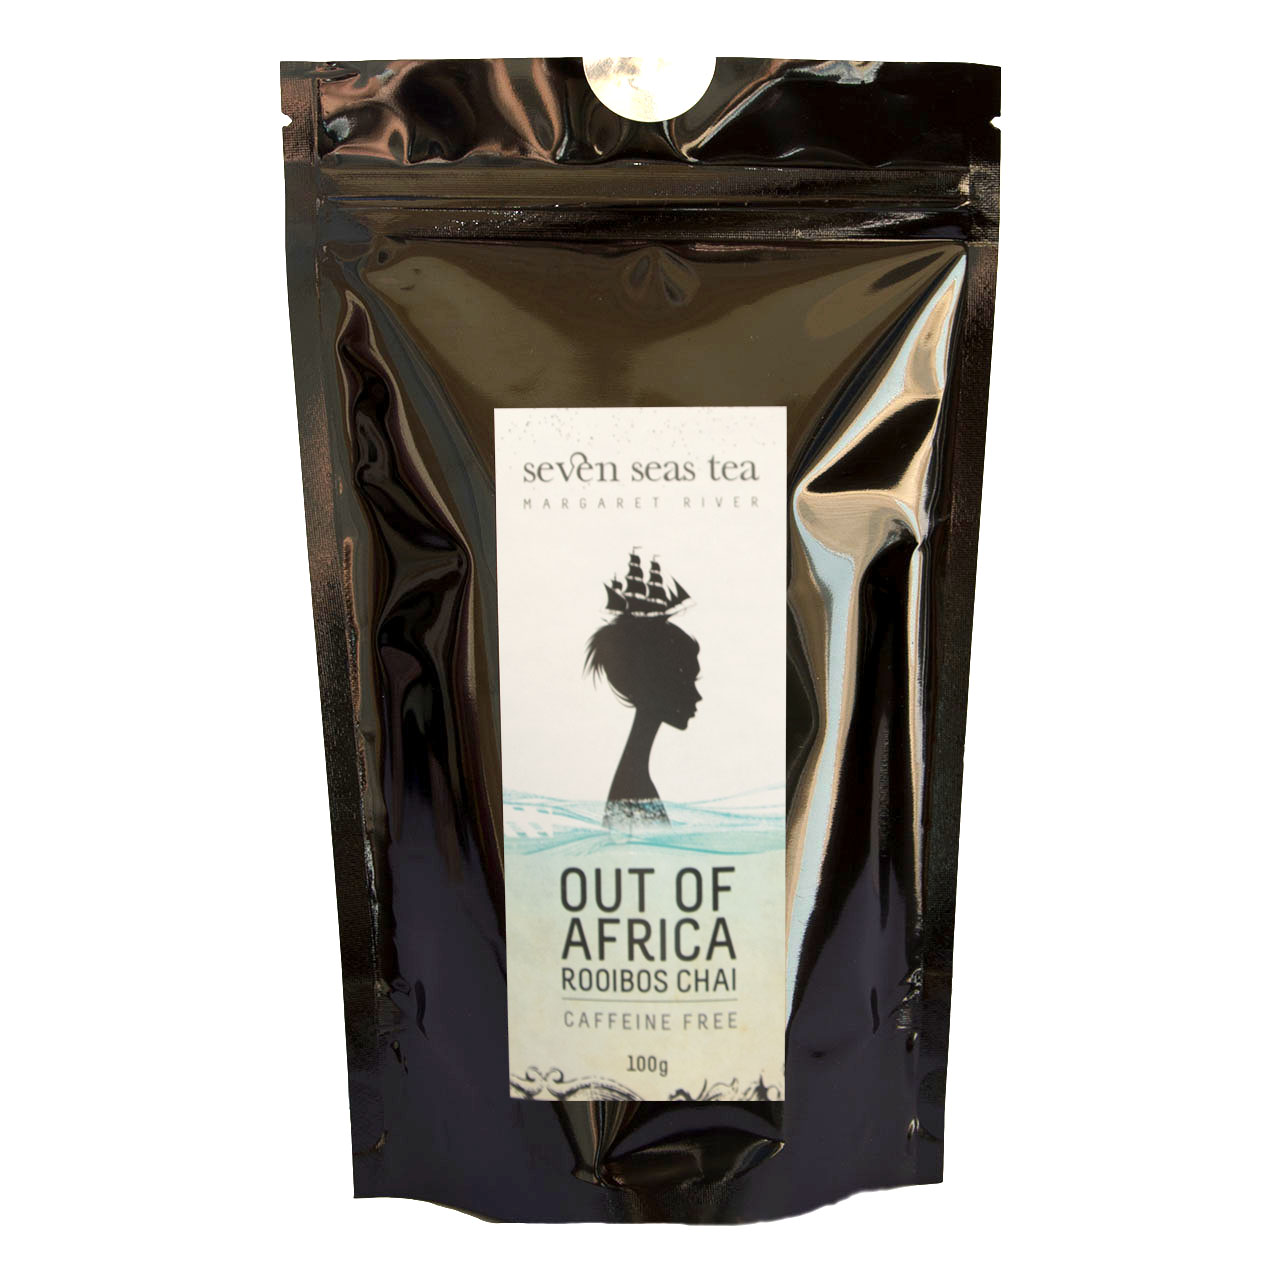 Out of Africa Organic Roobois Chai